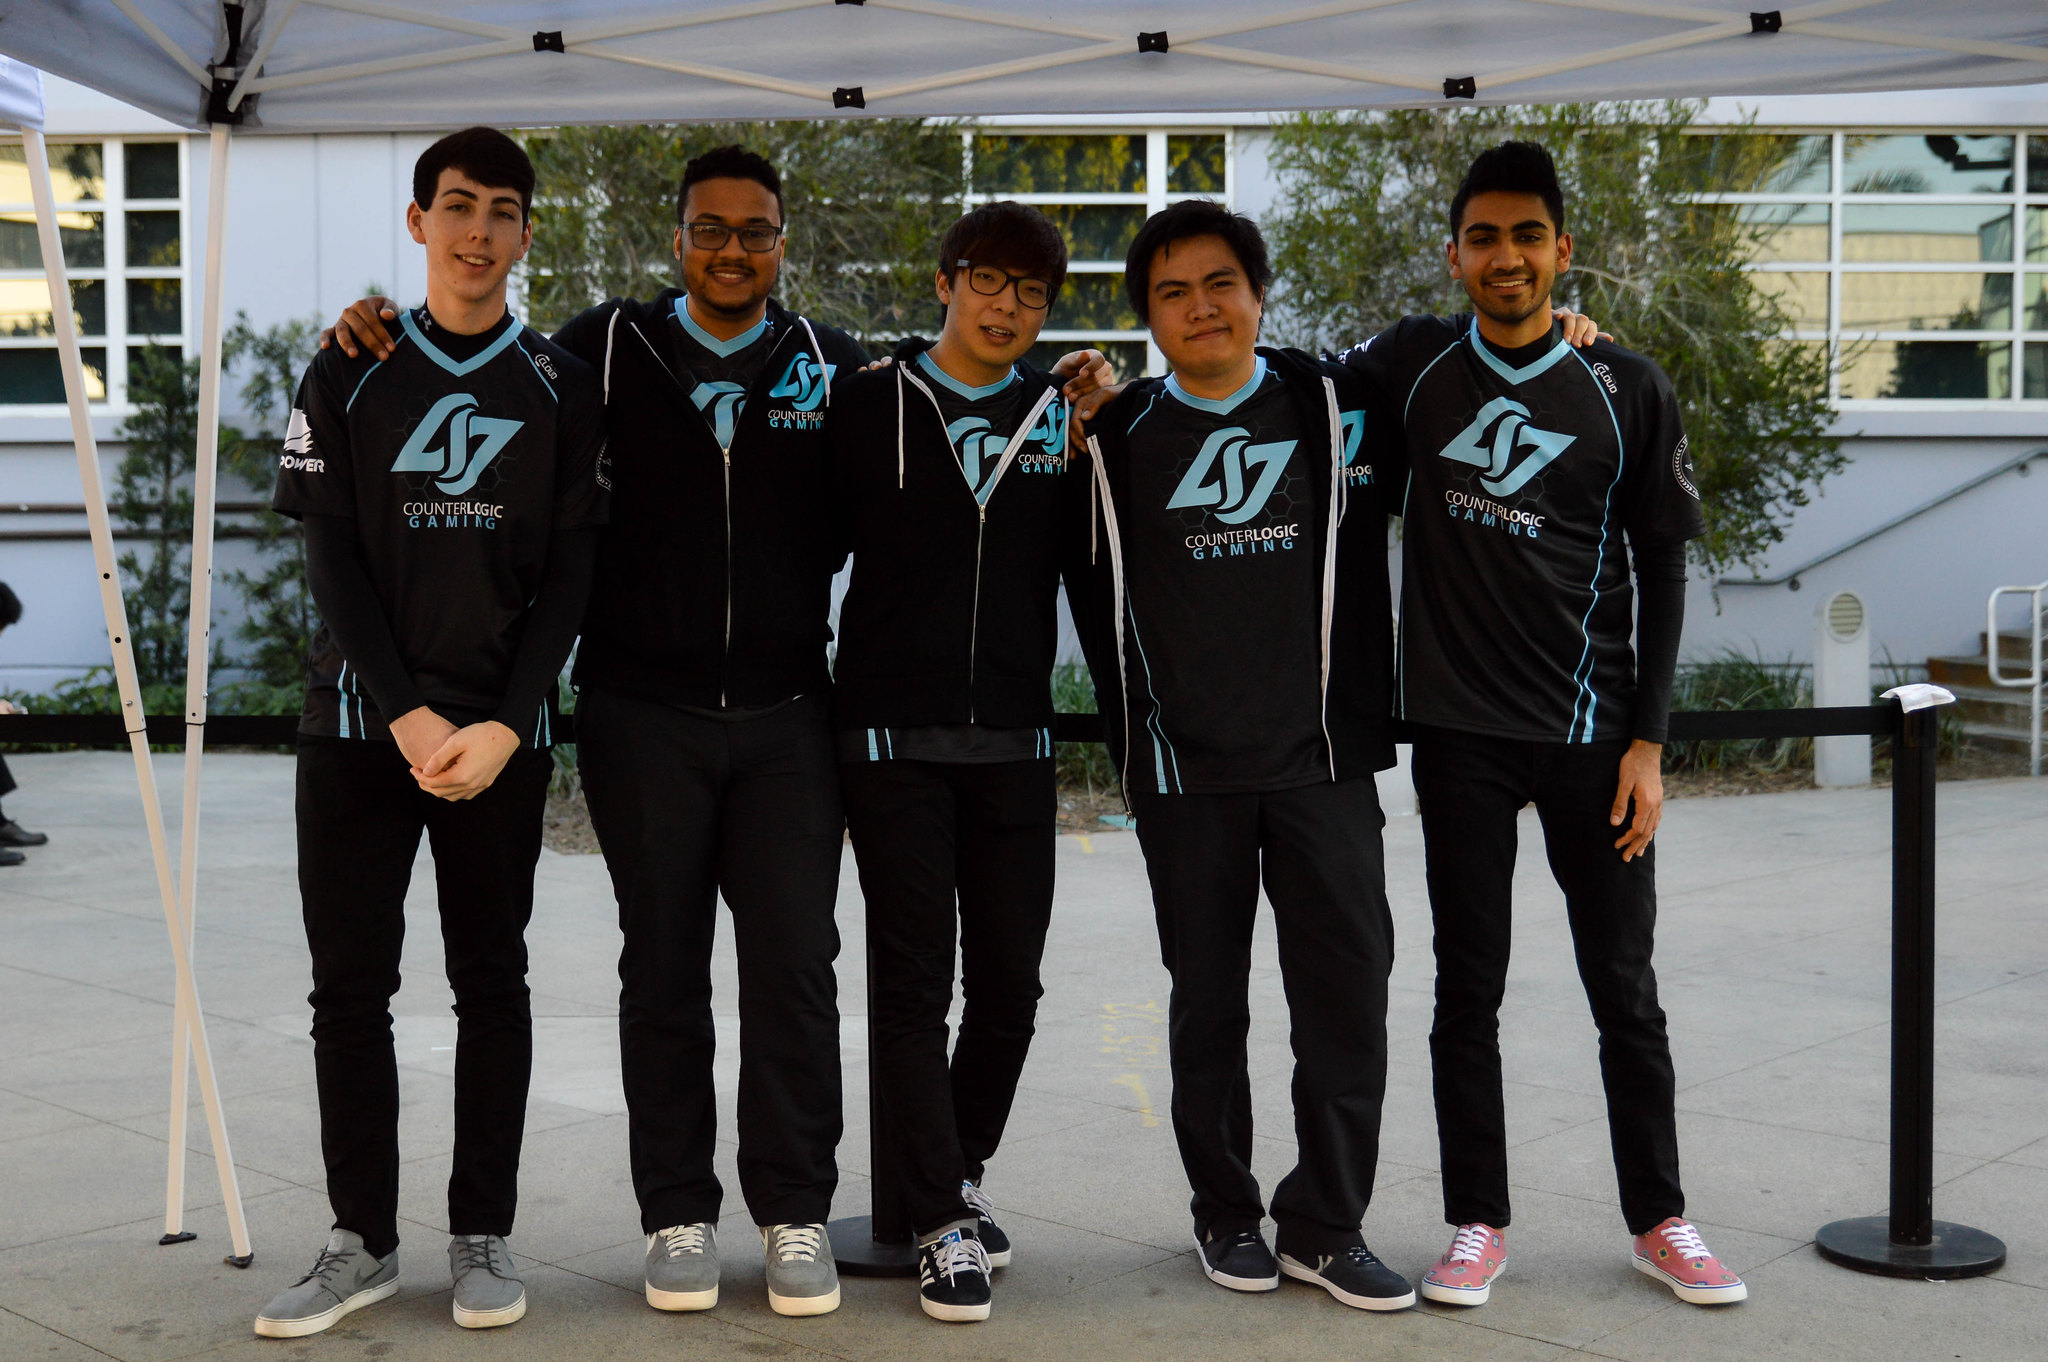 Esports apparel leader H4X announces new athletes to its roster